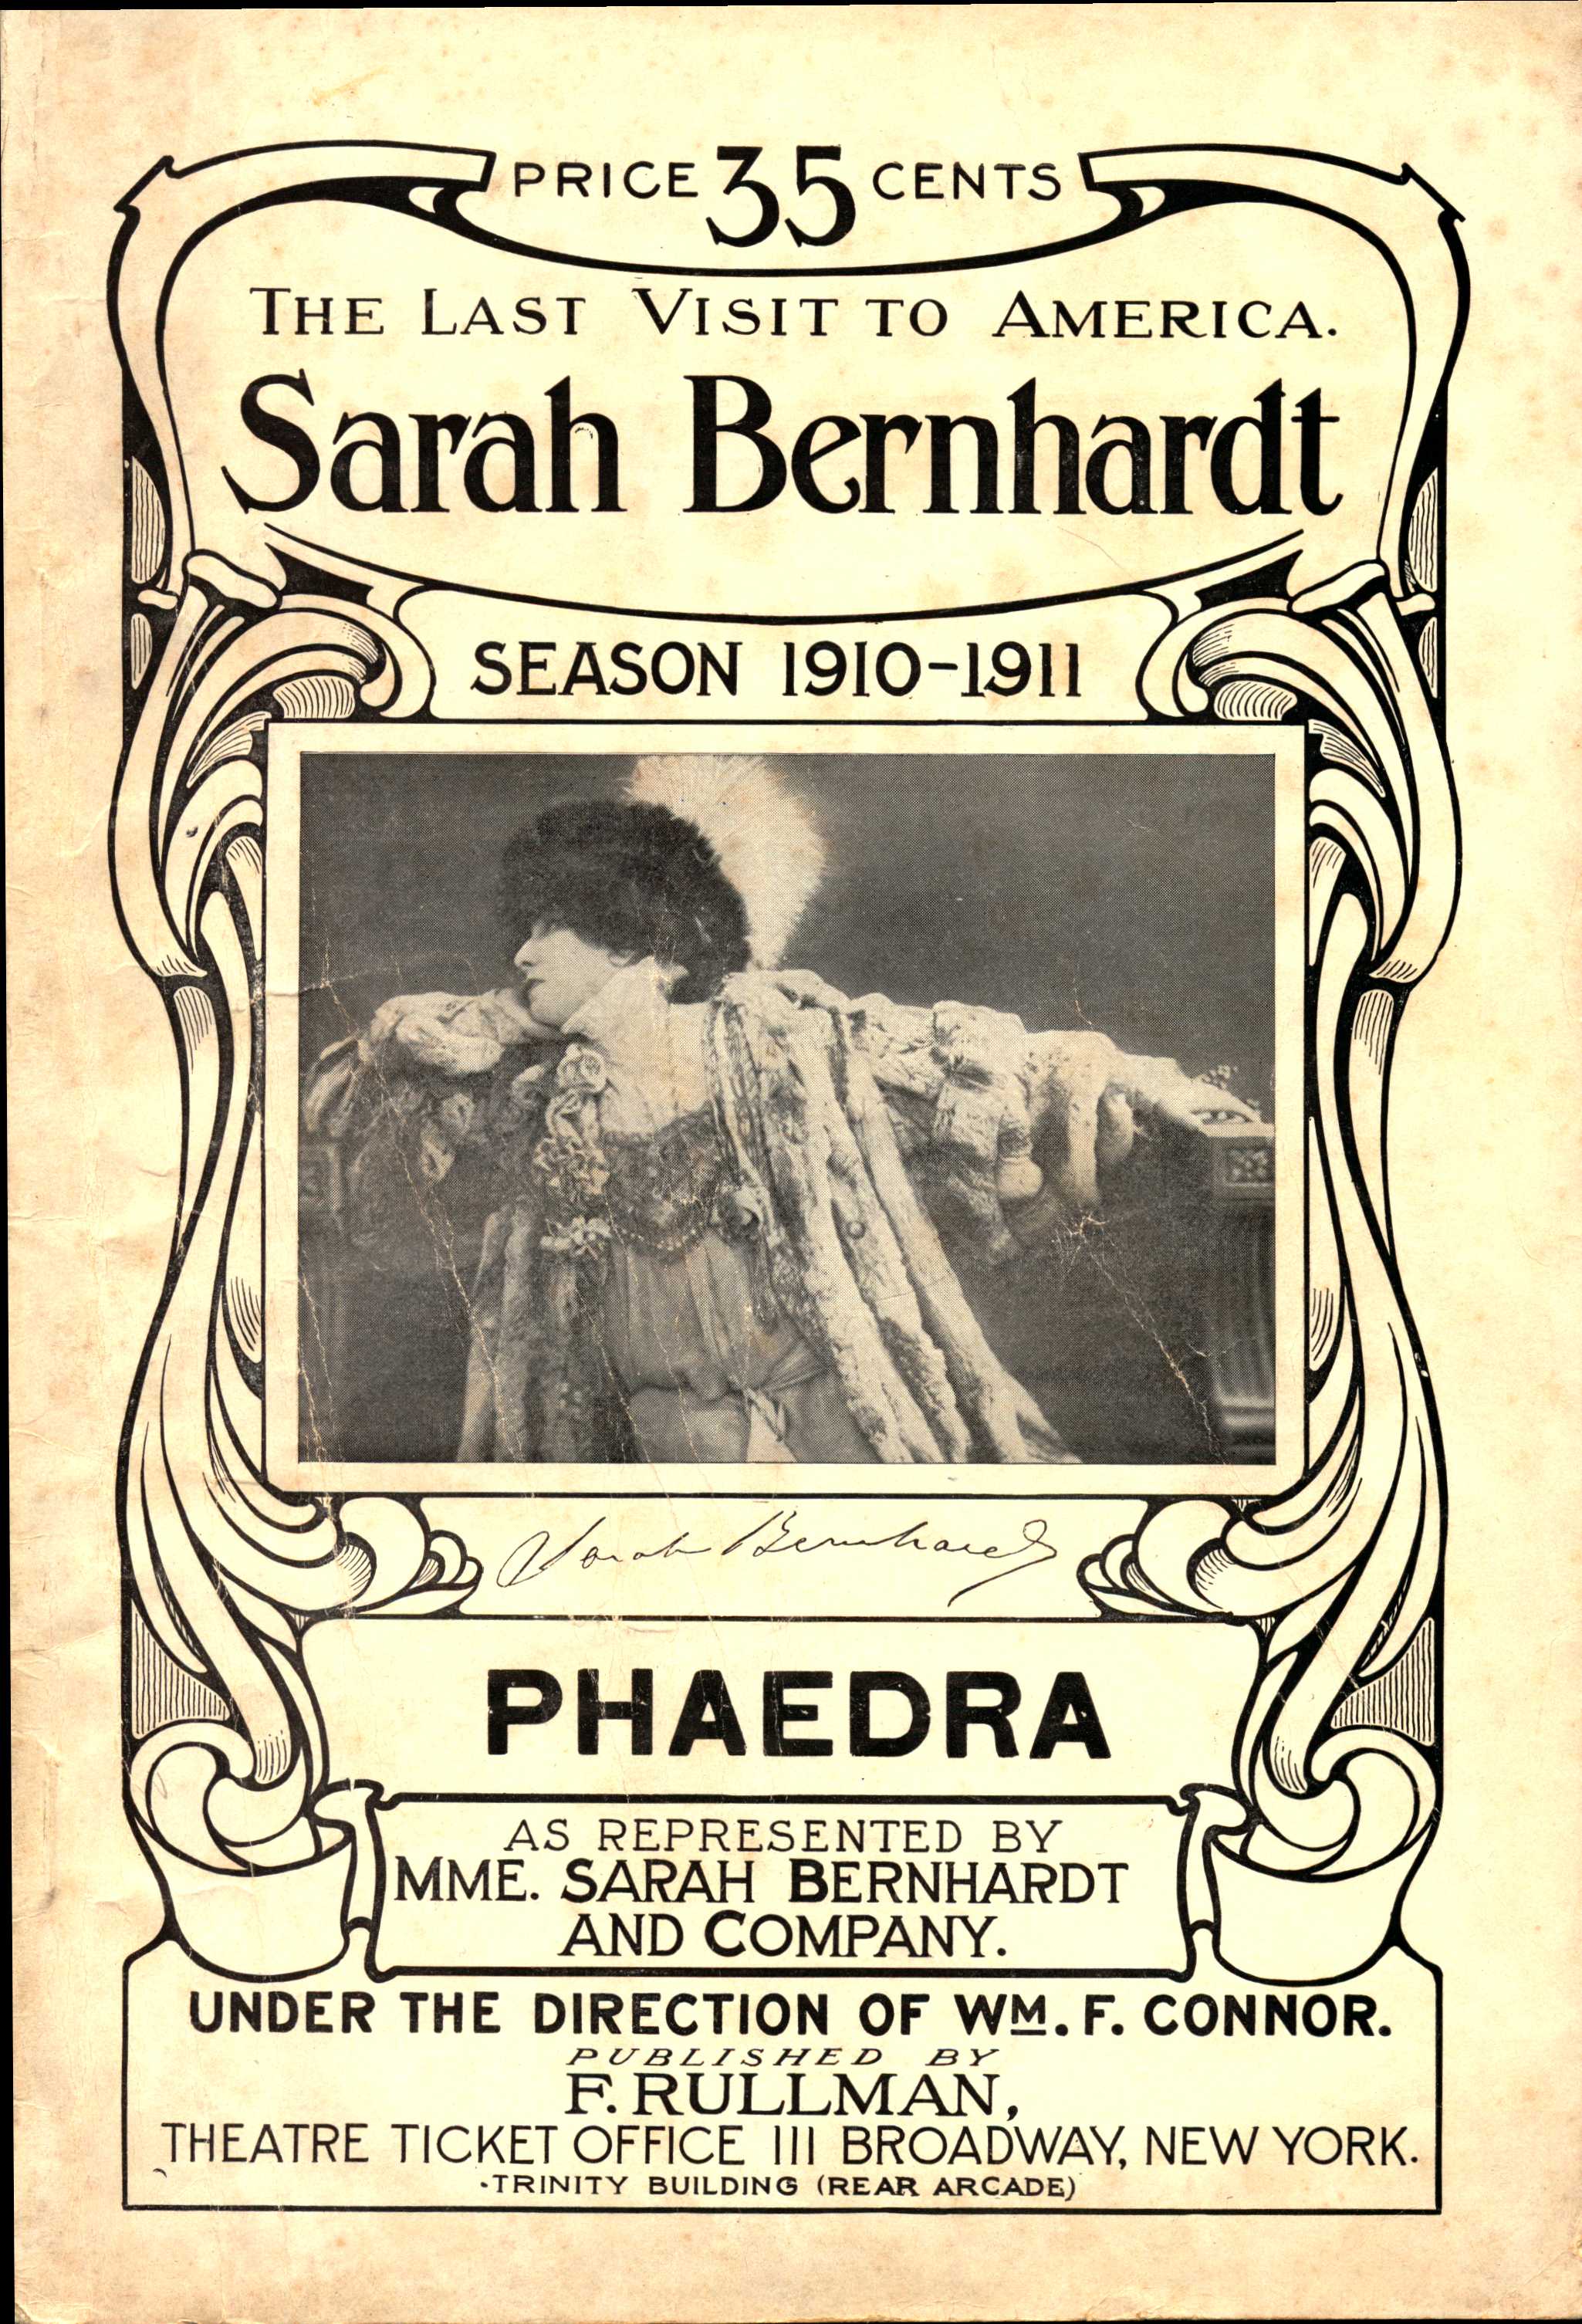 Front cover shows a portrait of Sarah Bernhardt and some play information